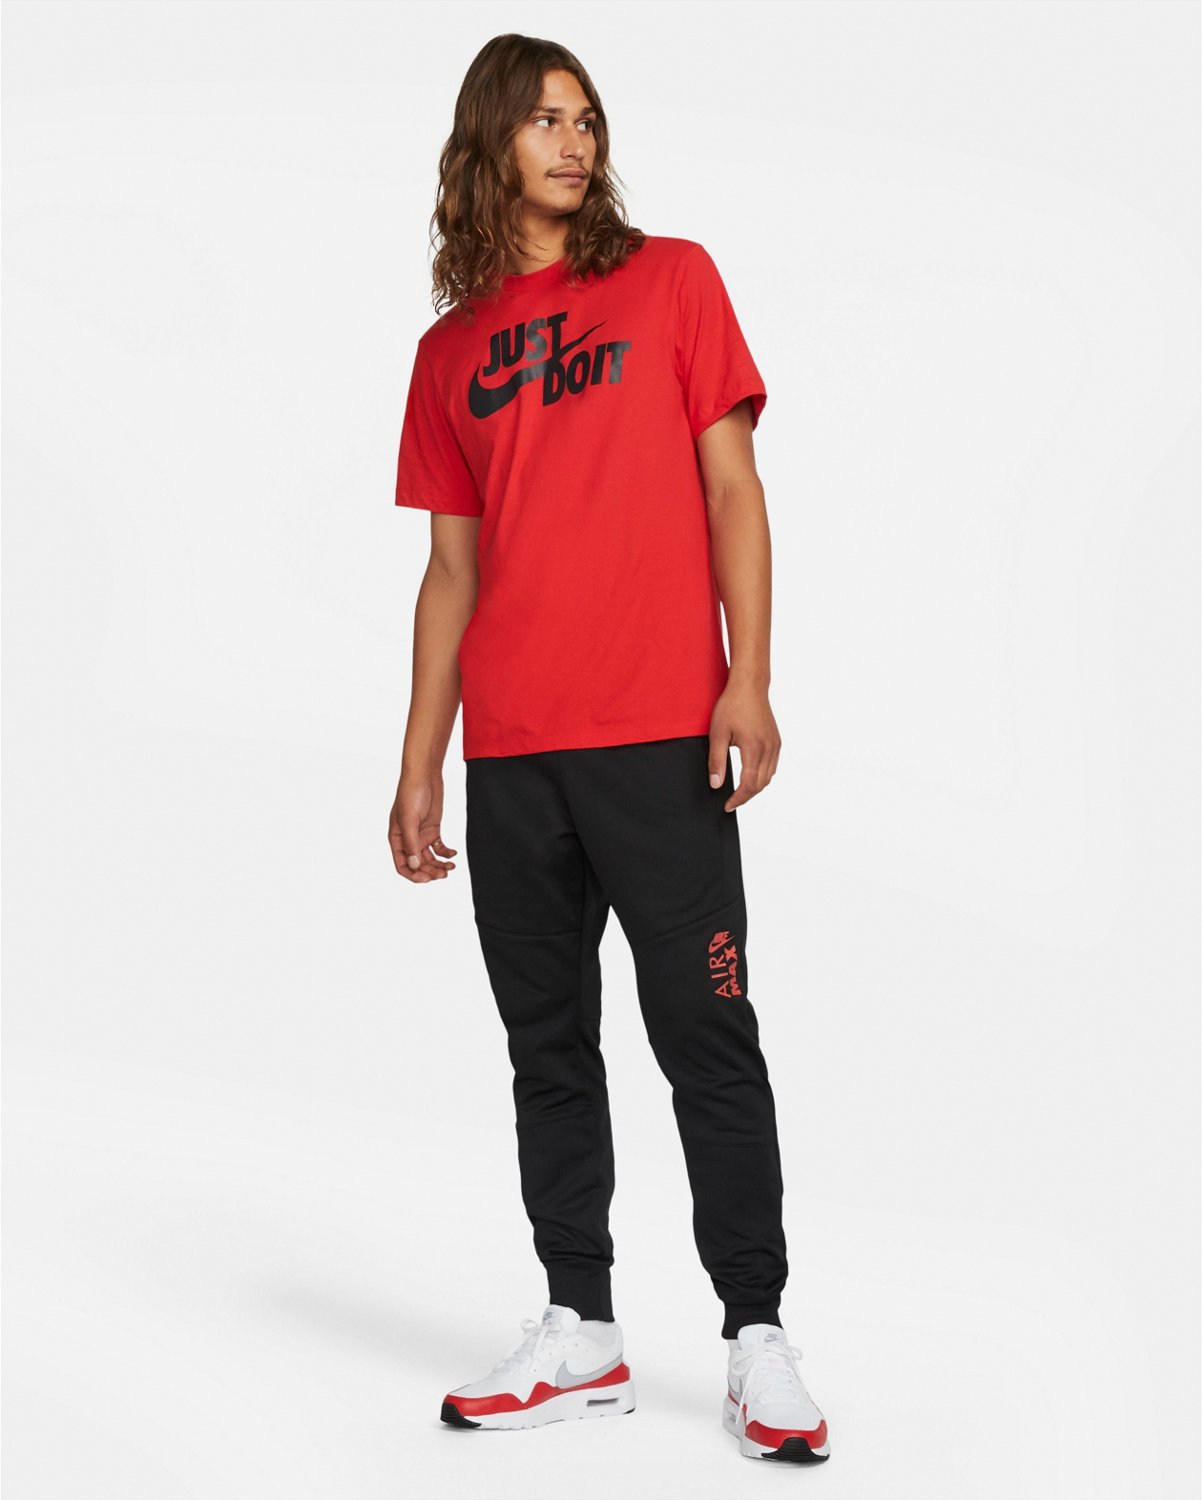 Nike Men's Just Do It T-shirt                                                                                                    - view number 4